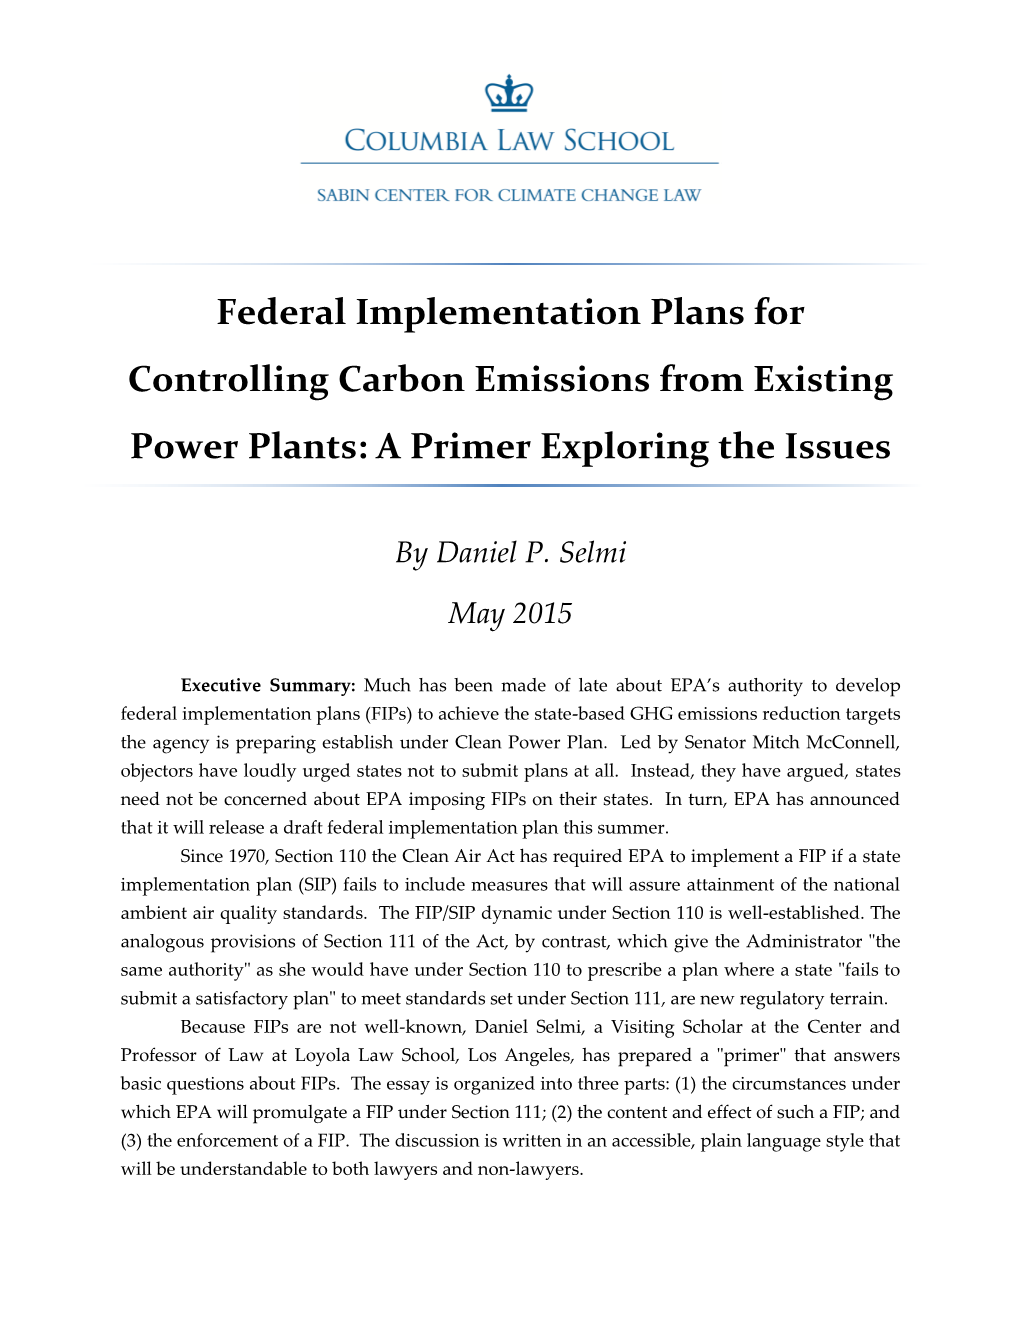 Federal Implementation Plans for Controlling Carbon Emissions from Existing Power Plants: a Primer Exploring the Issues